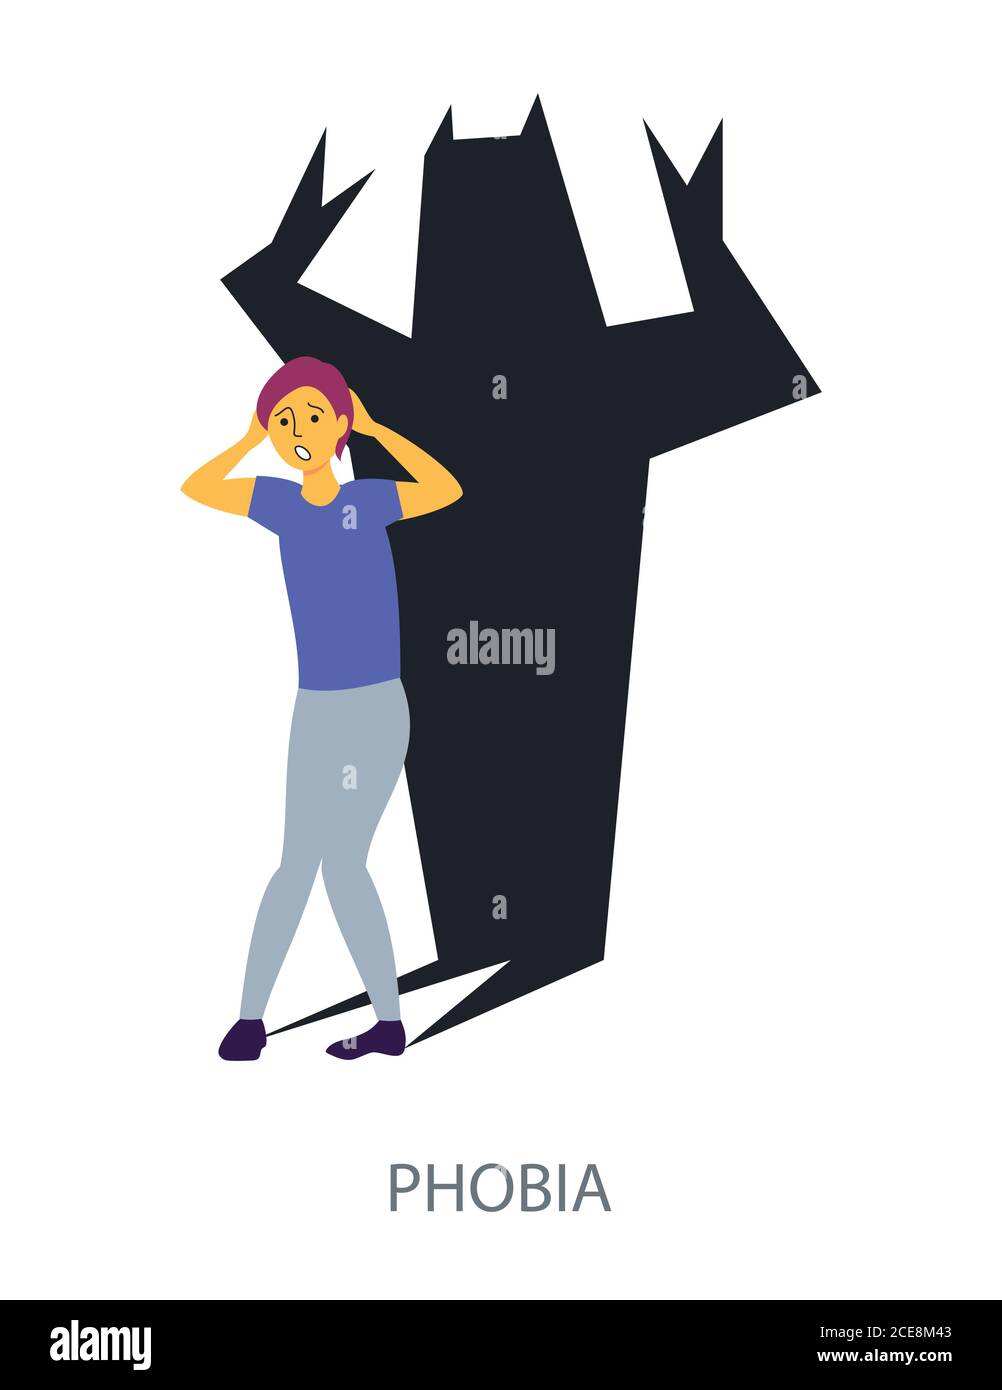 Phobia concept on white background, flat design vector illustration Stock Vector